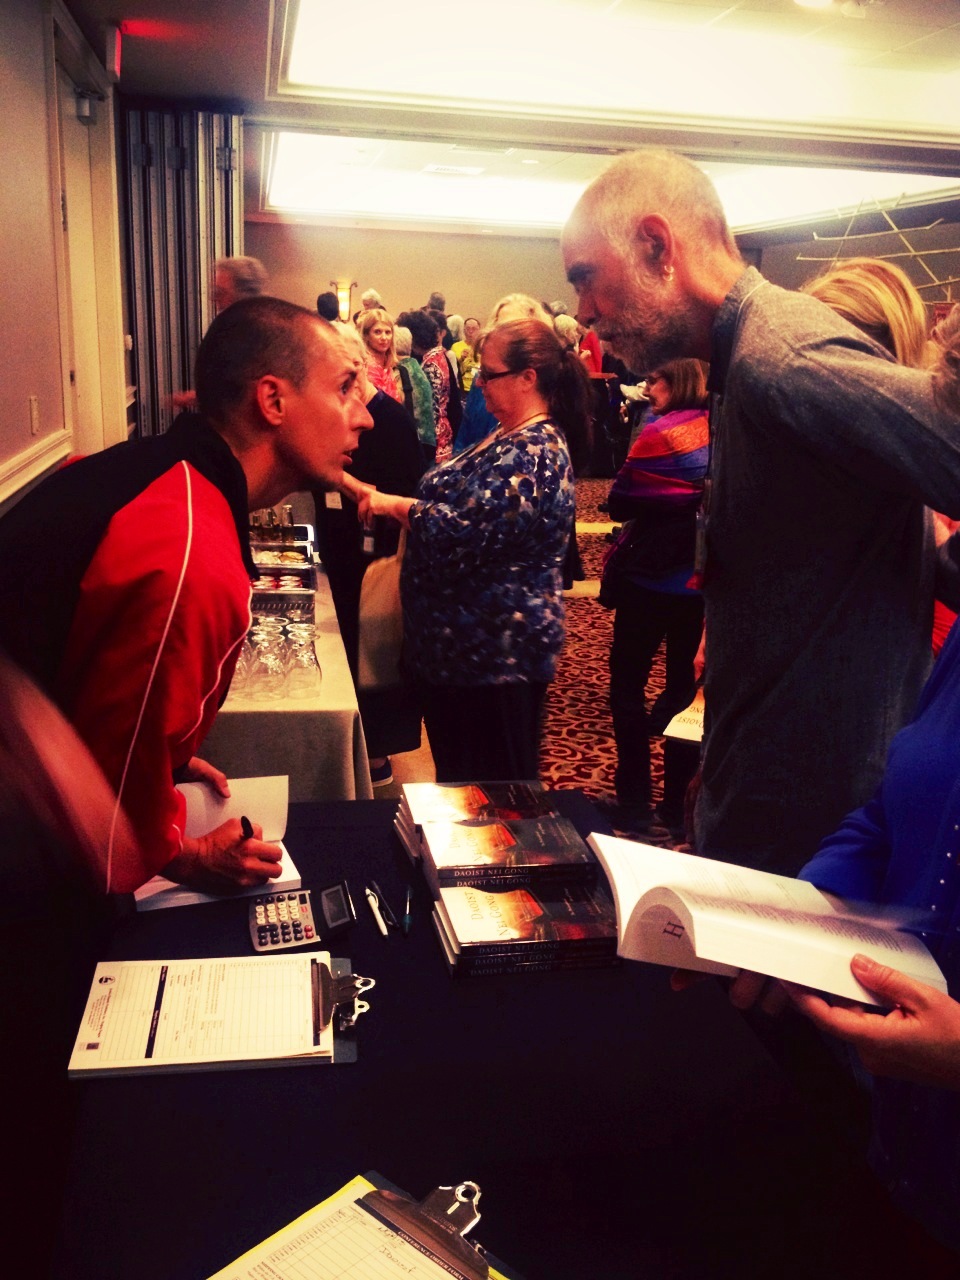 Damo Mitchell speaking with a NQA conference attendee during his book signing